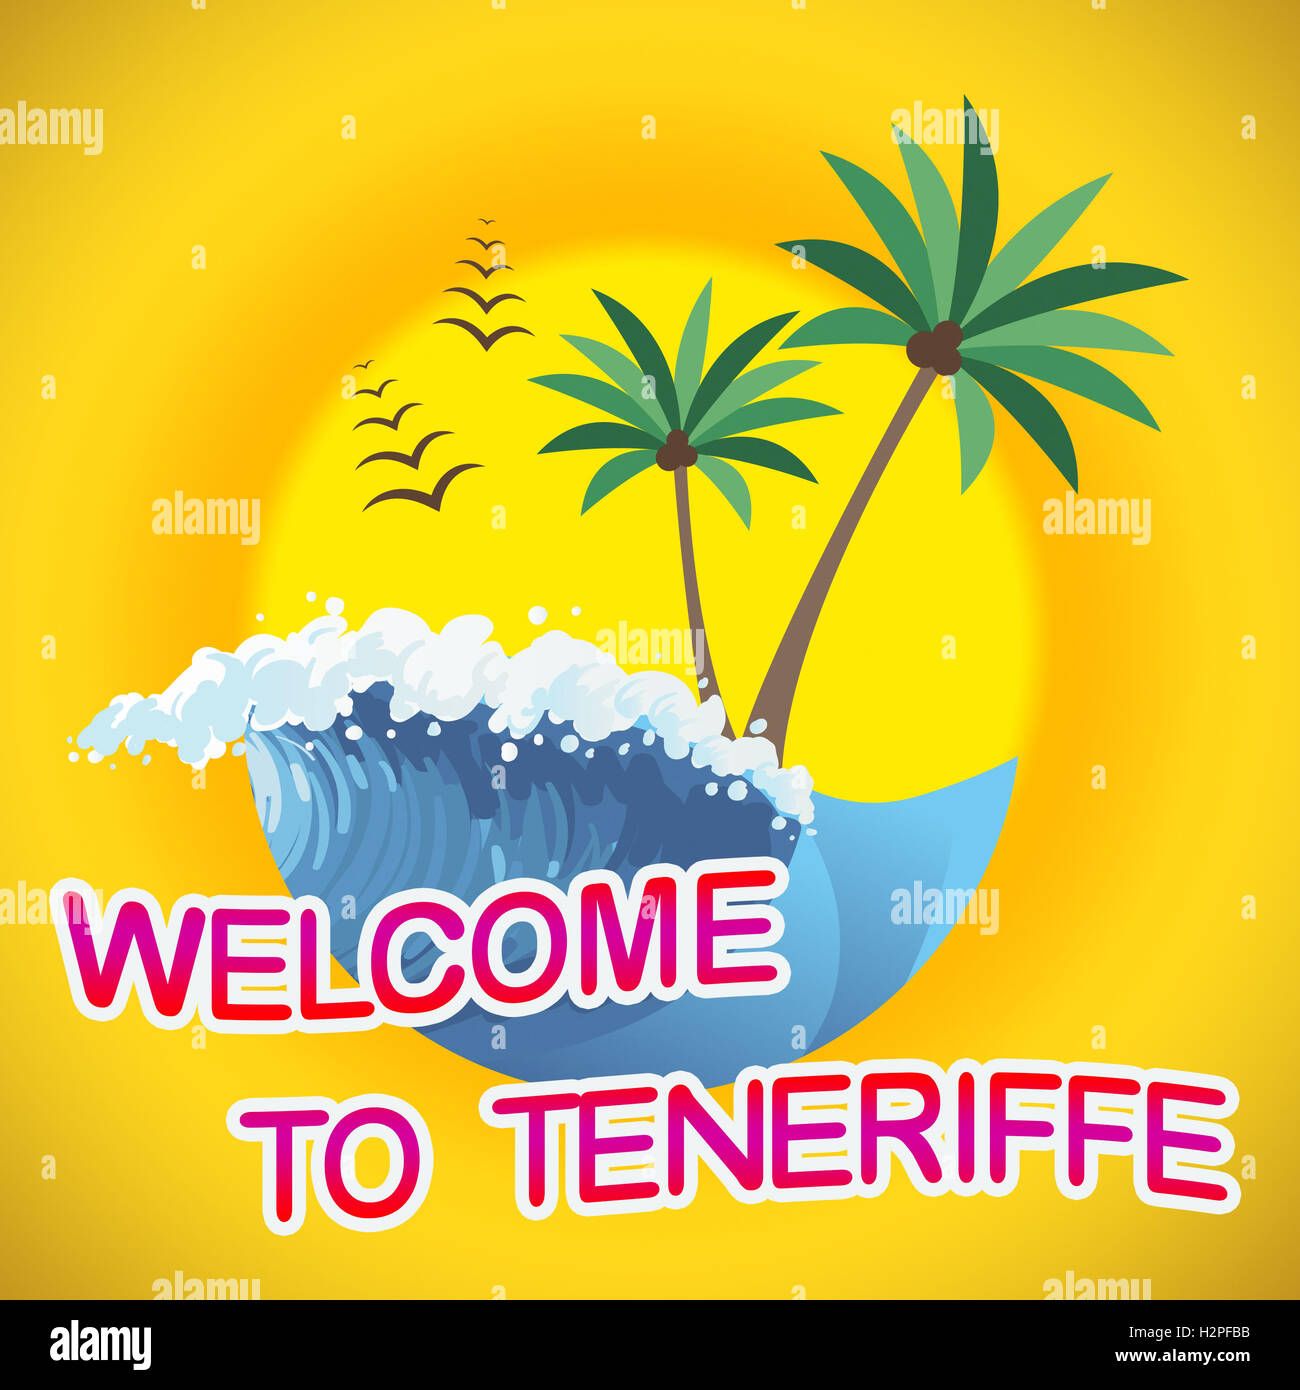 Welcome To Teneriffe Representing Summer Time And Vacations Stock Photo